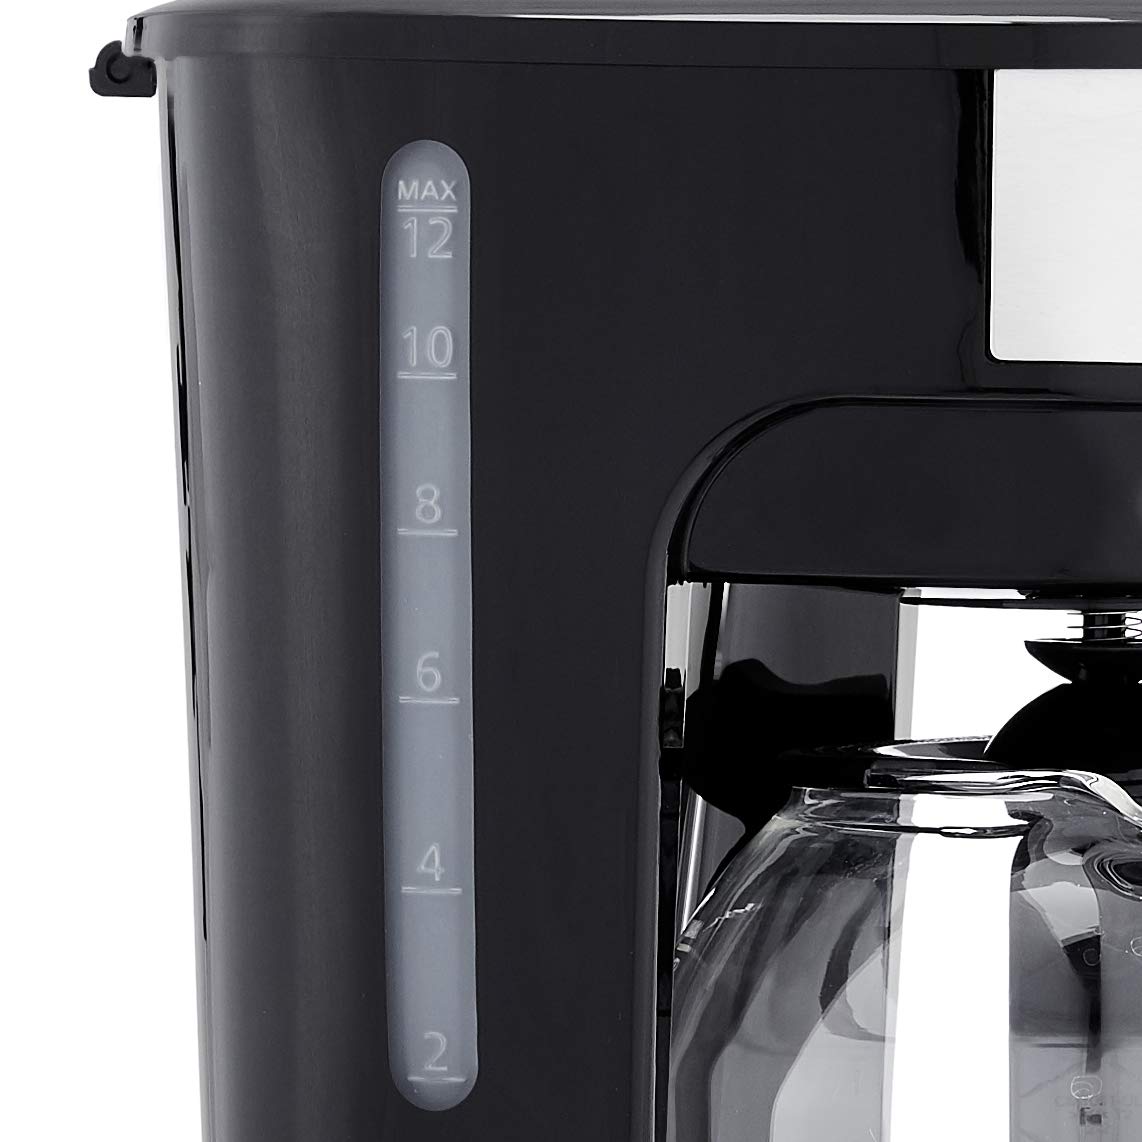 Amazon Basics 12 Cup Coffee Maker With Reusable Filter, Black & Stainless Steel